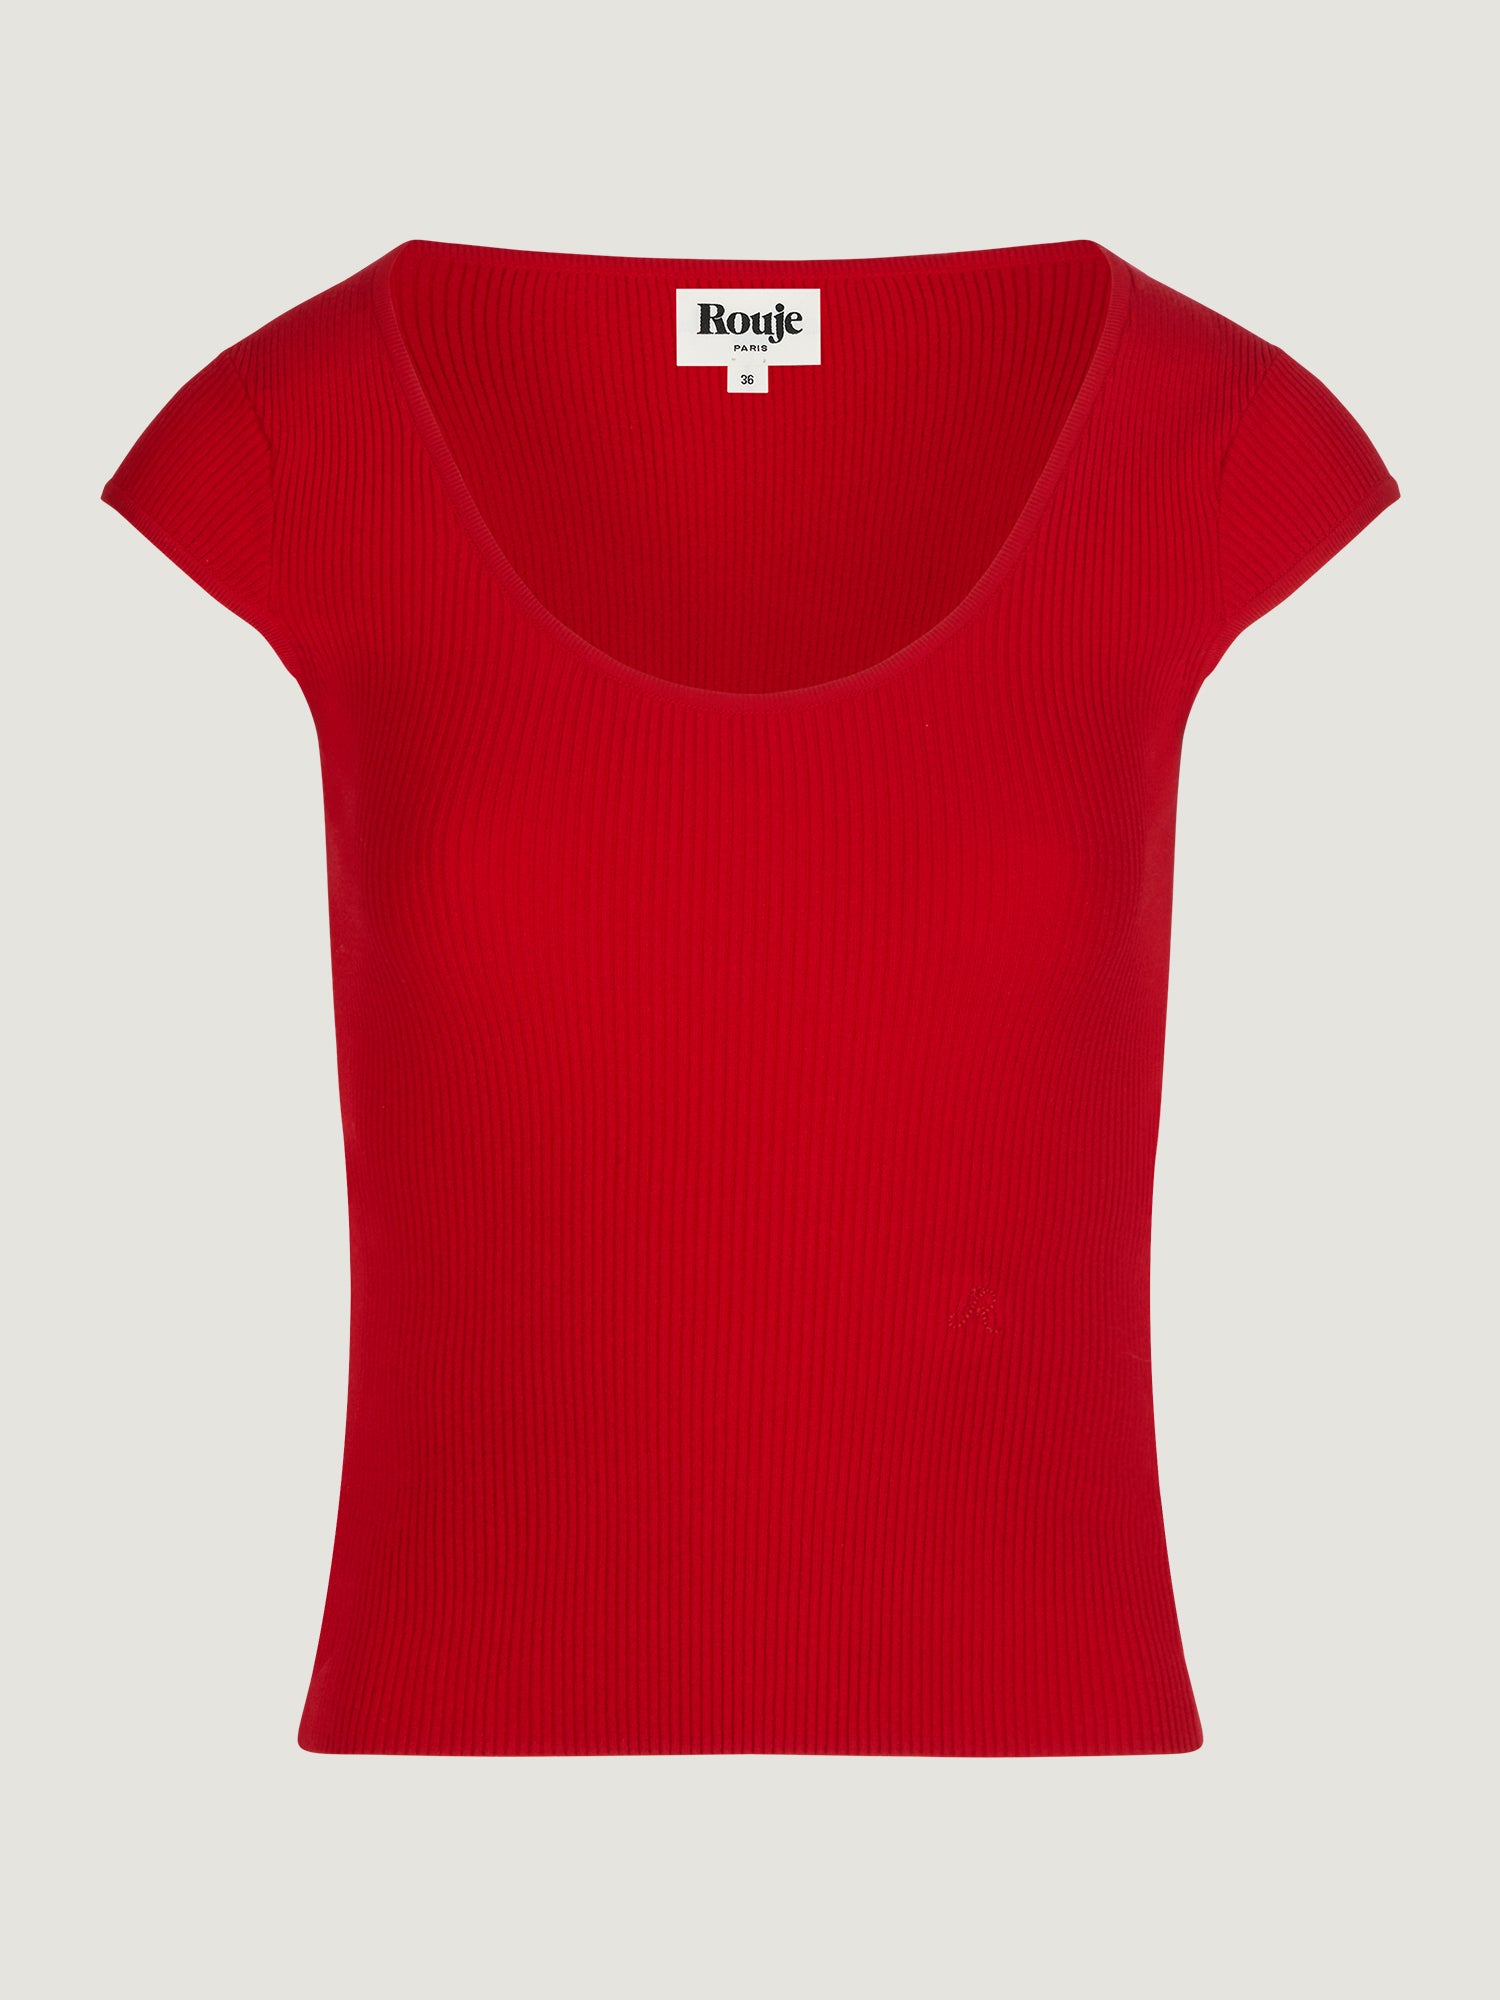 Ribbed knit top with trapeze neckline | Rouje • Rouje Paris